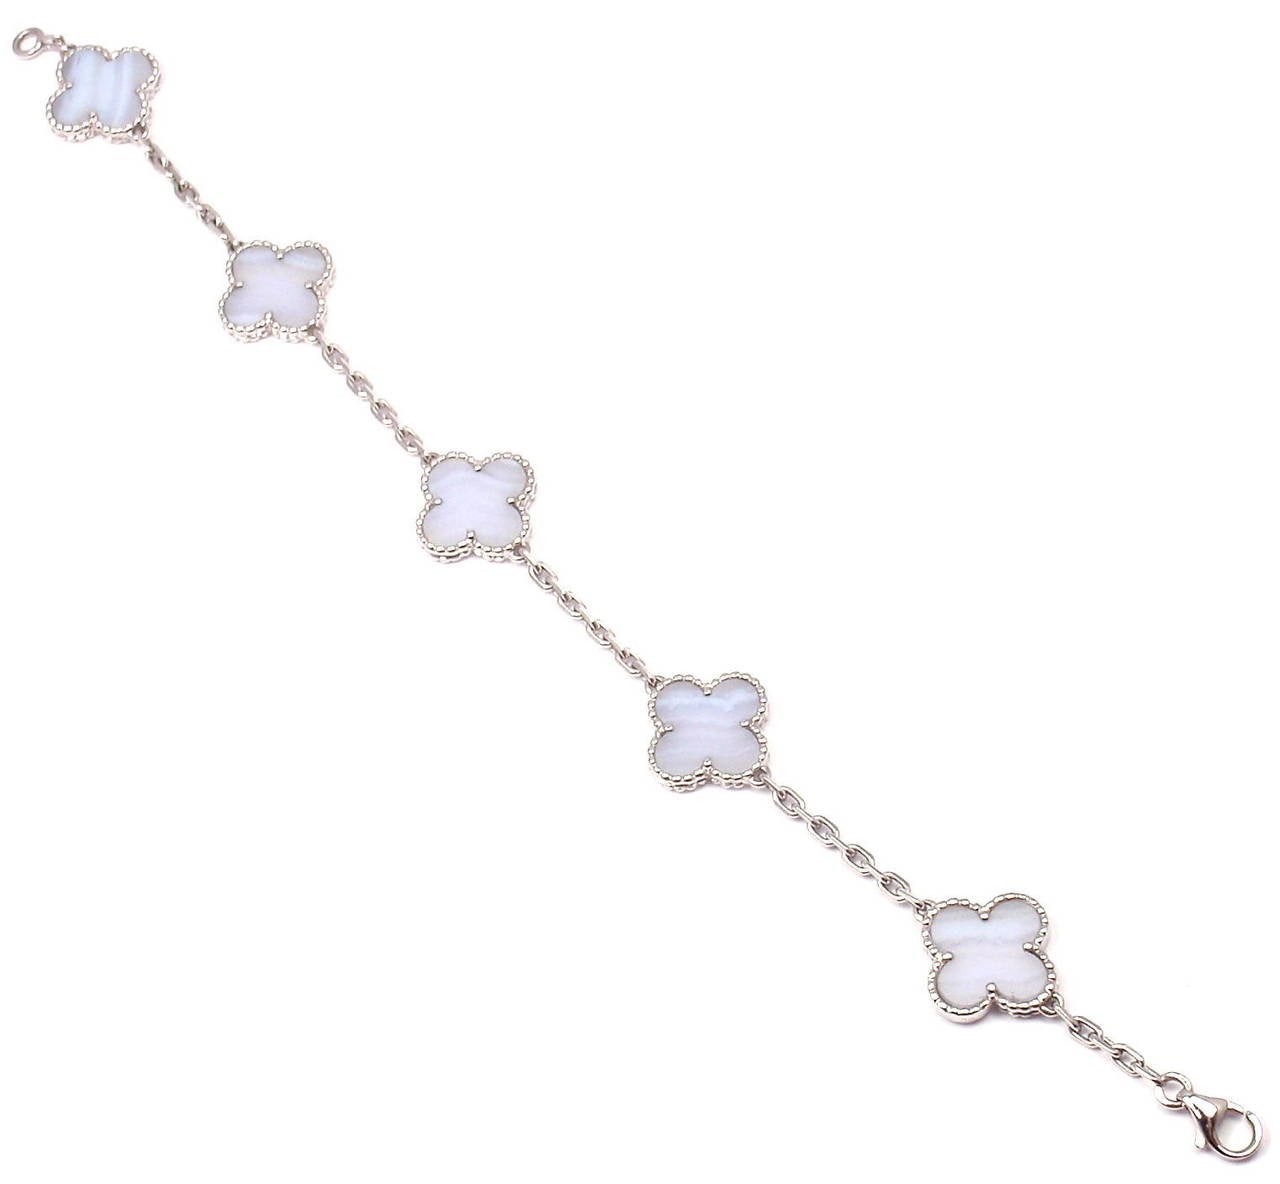 18k White Gold 5-Motif Chalcedony Bracelet by Van Cleef & Arples. 
Part of VCA's absolutely stunning 